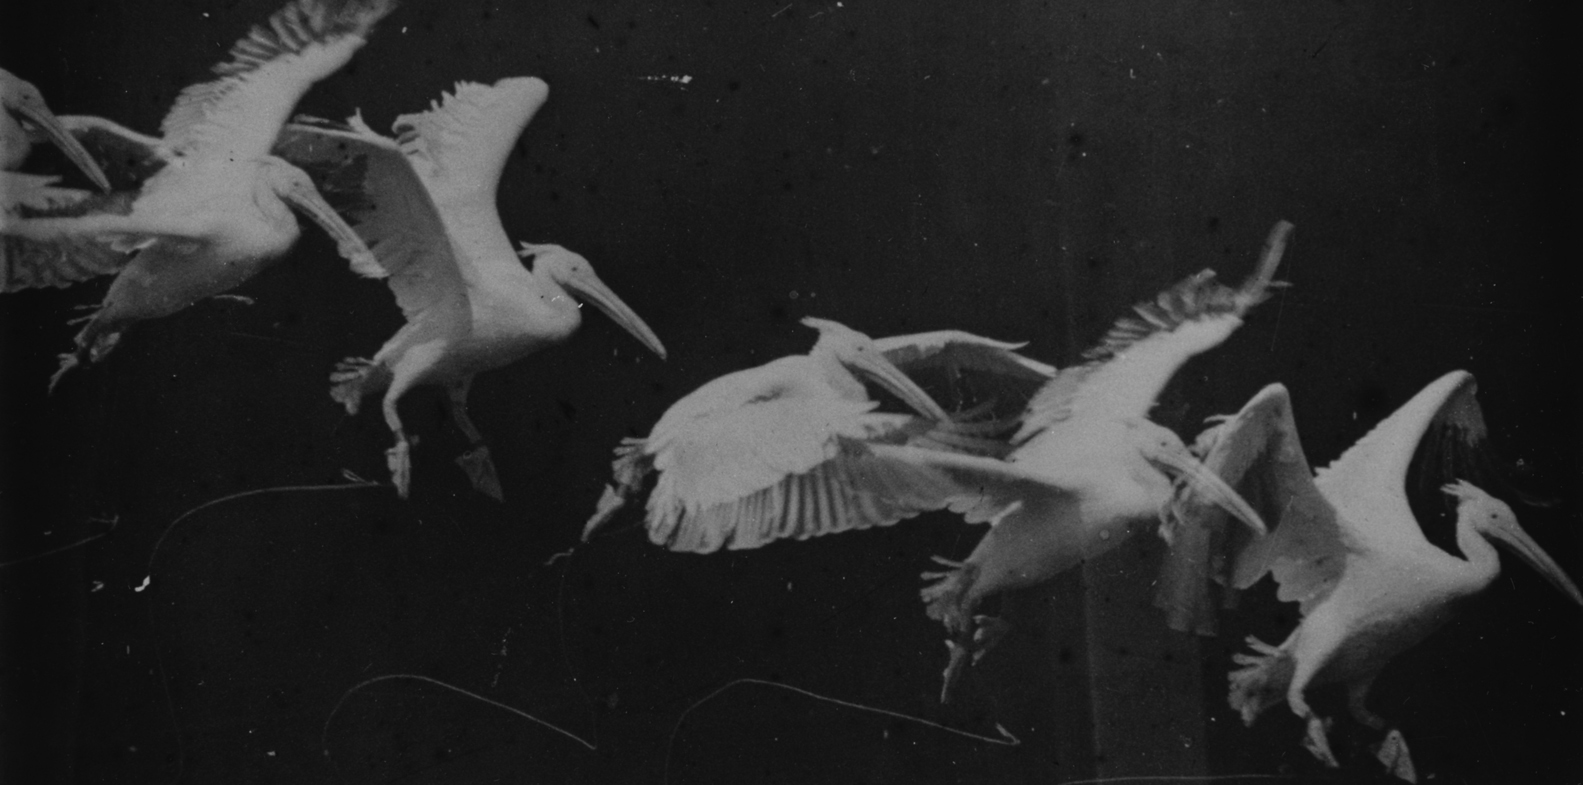 Chronophotograph of a bird, by Etienne-Jules Marey